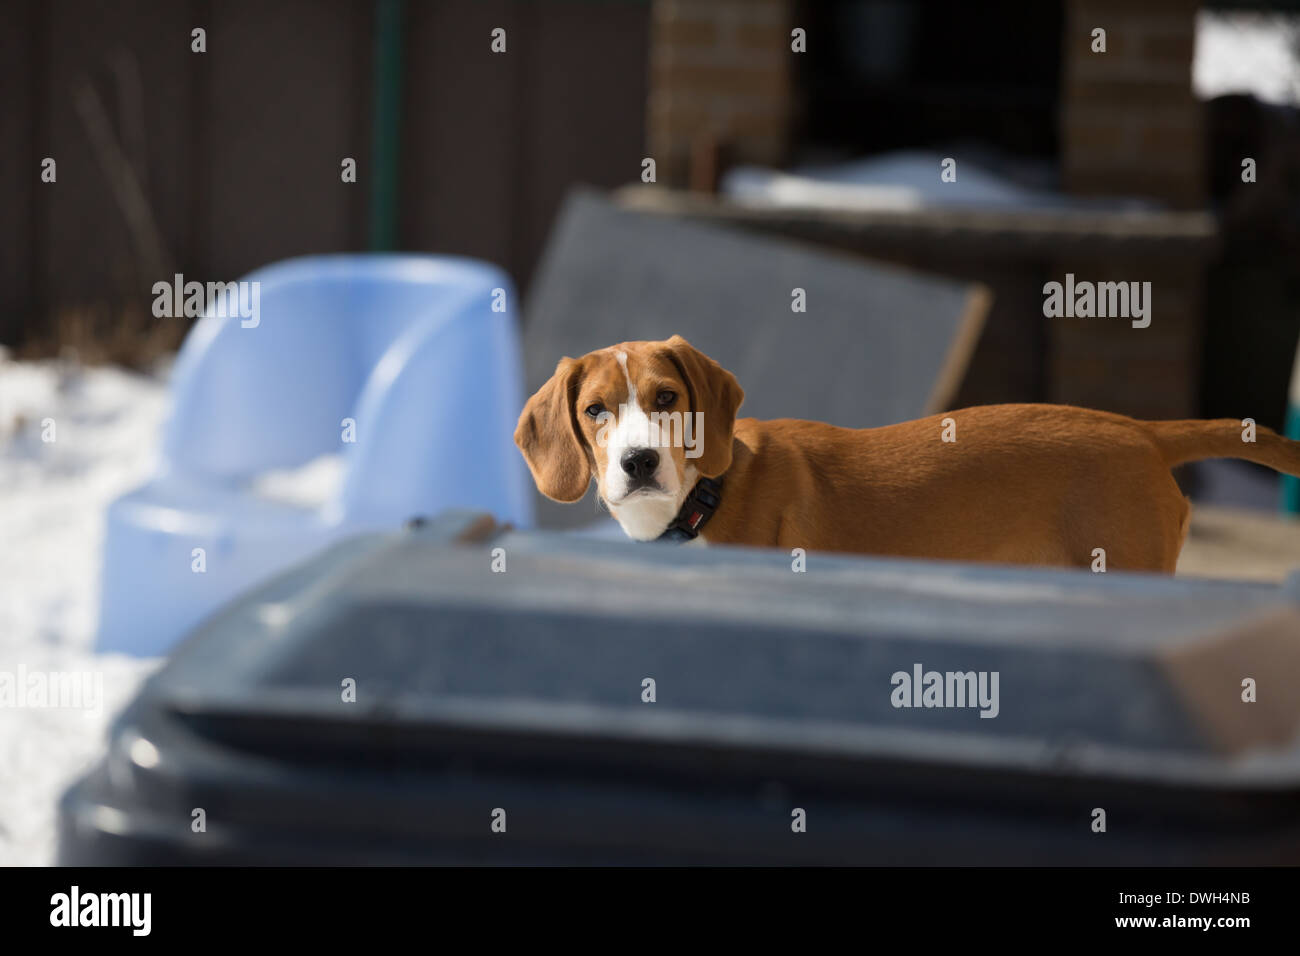 A beagle puppy looking bewildered Stock Photo